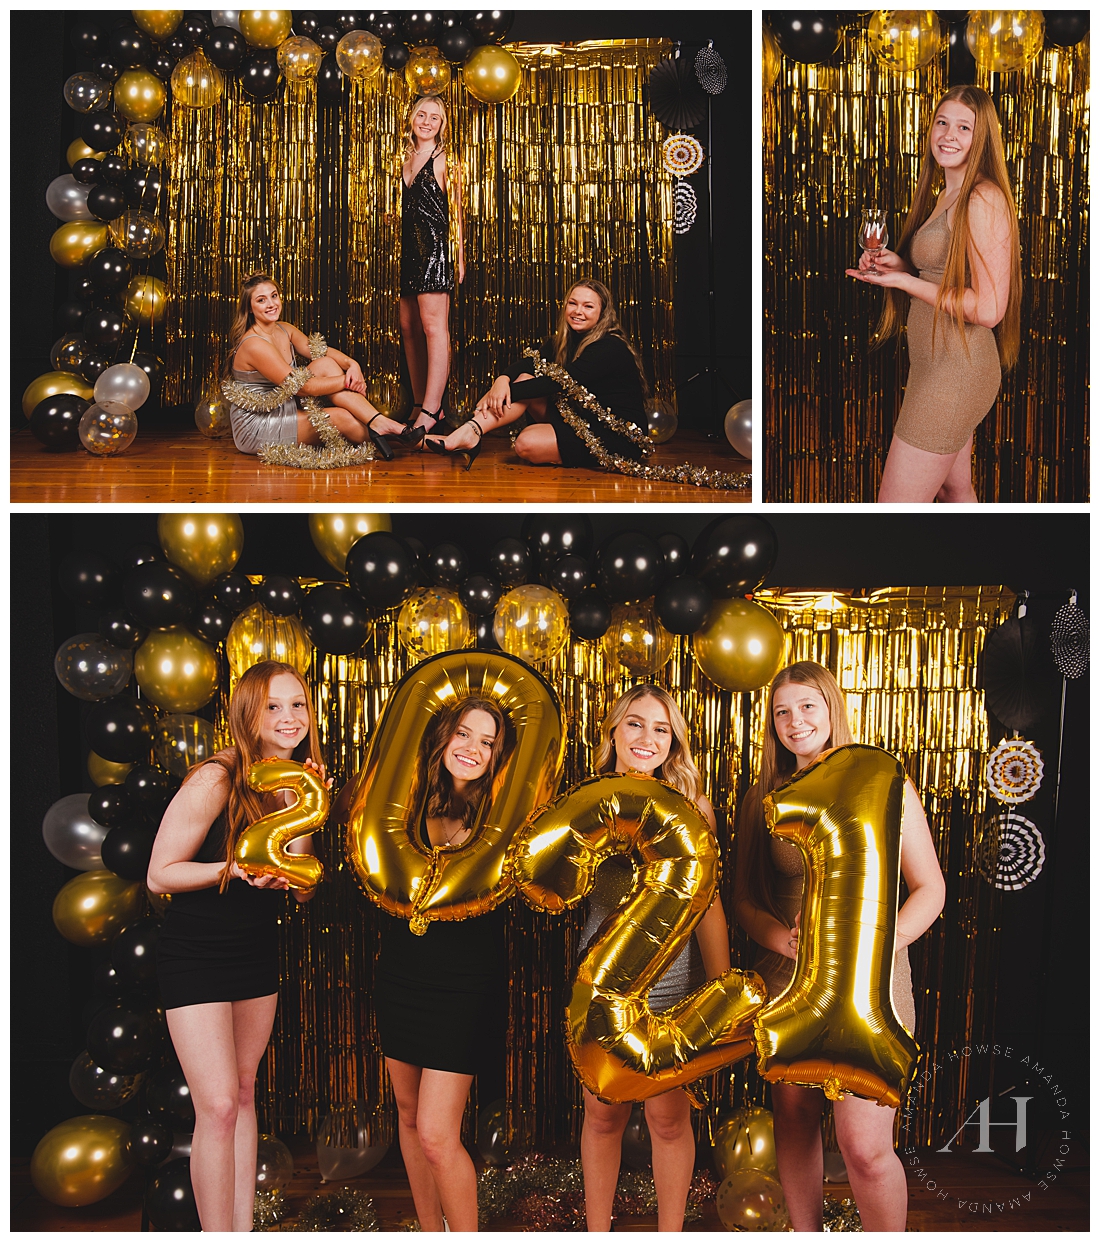 2021 New Year's Eve Portrait Session | The Model Team wore little black dresses to celebrate NYE early at Studio 253 AHP Model Team Highlights | Photographed by the Best Tacoma Senior Photographer Amanda Howse